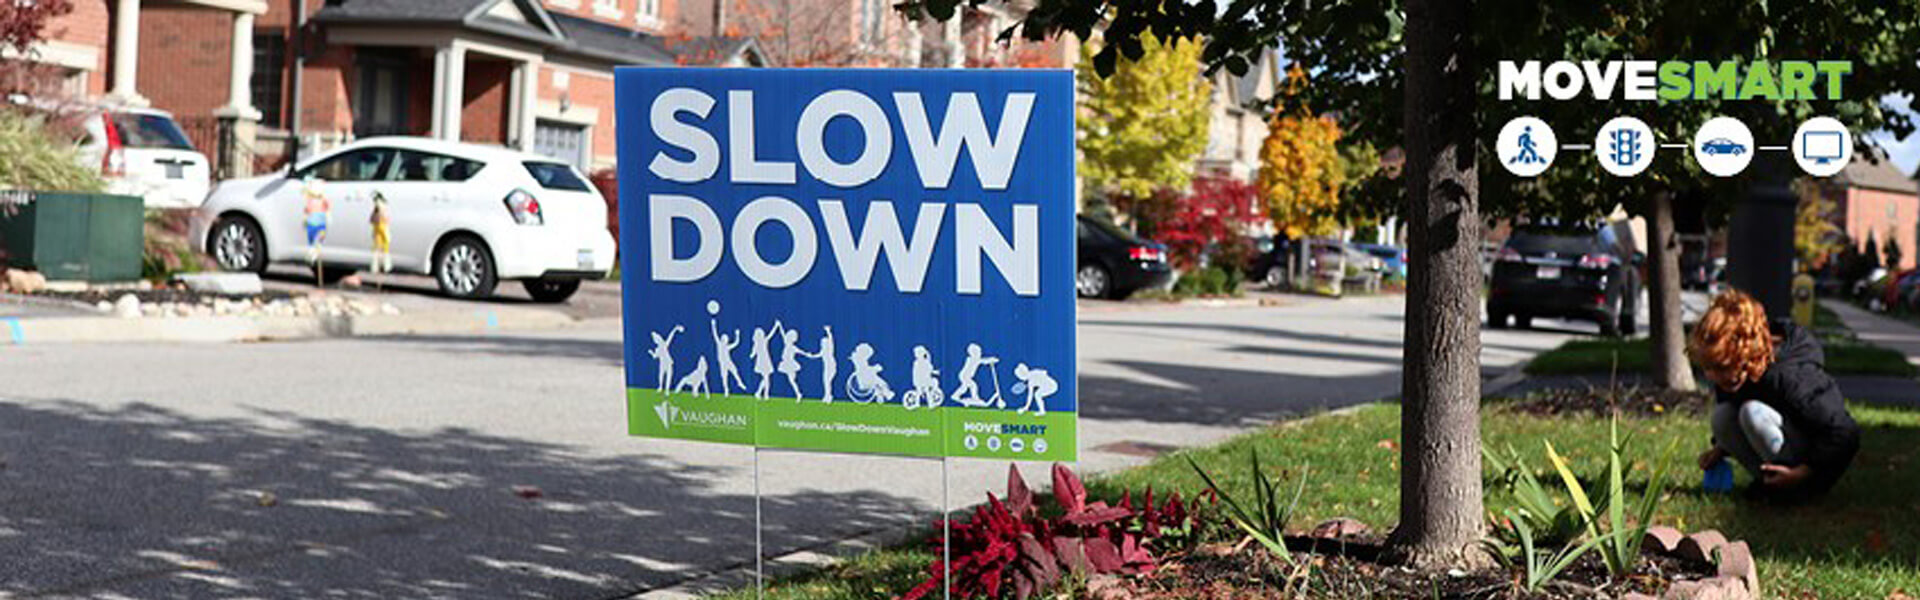 Slow Down - Move Smart